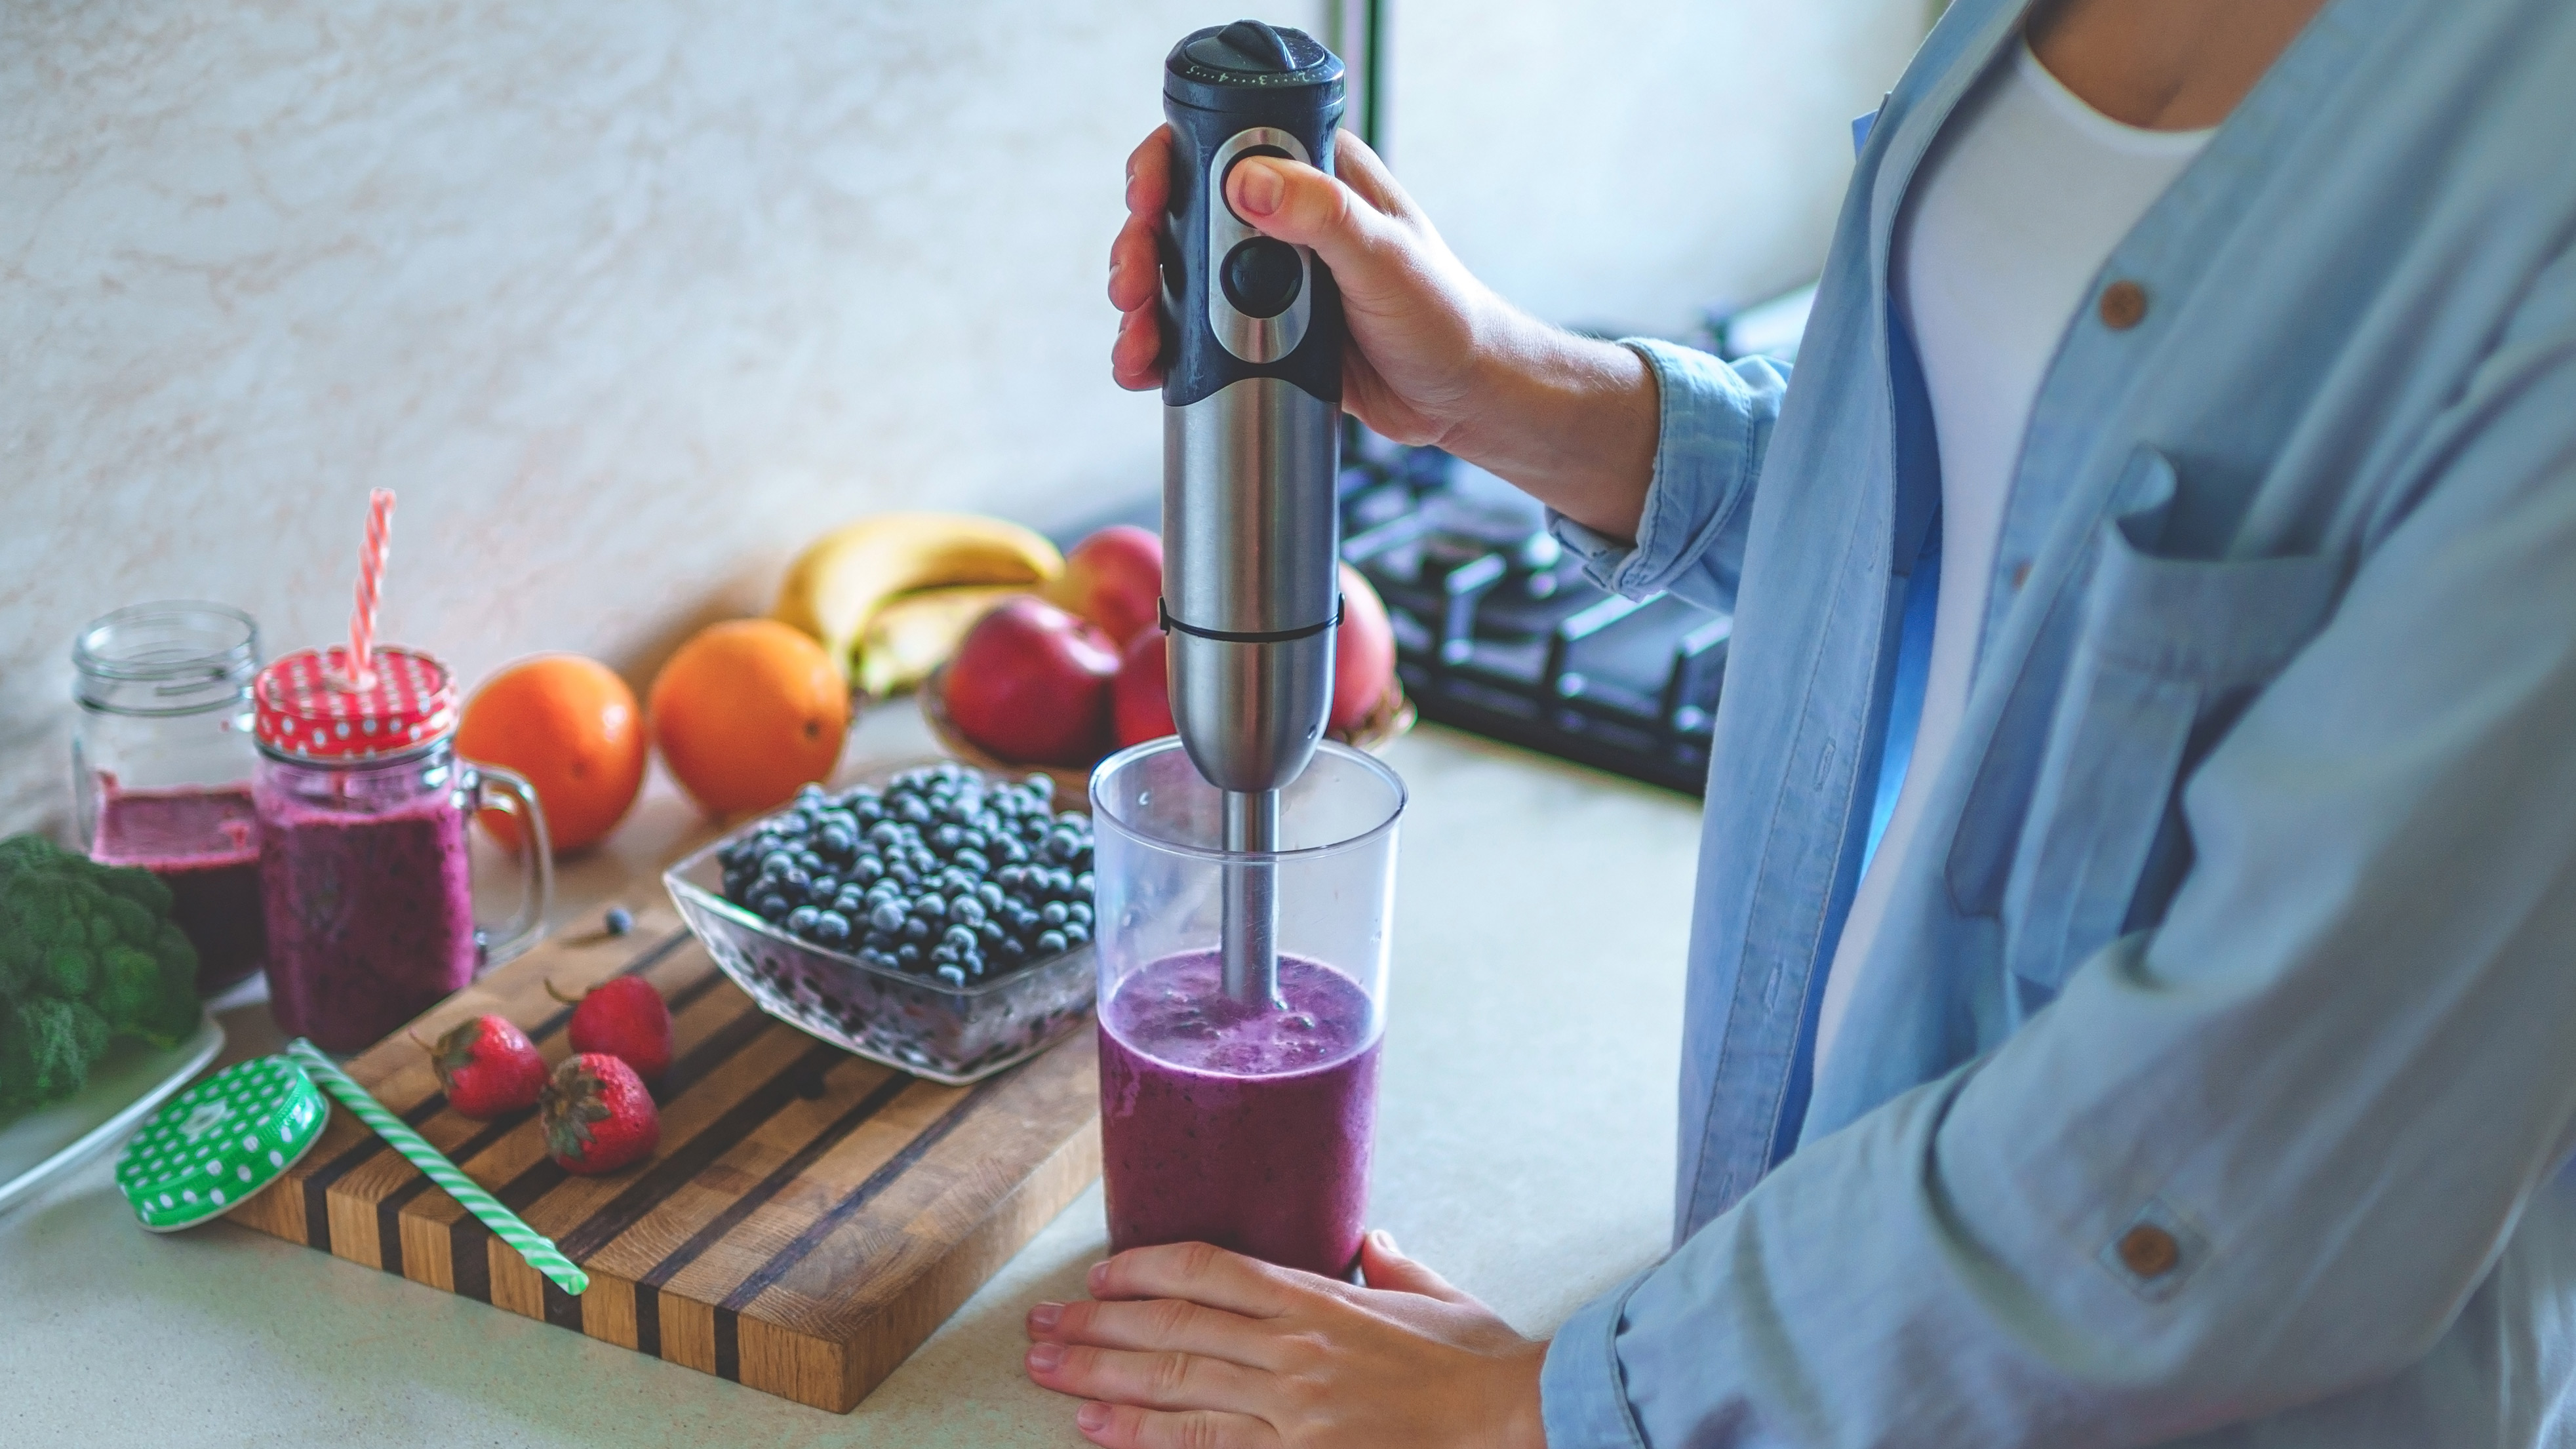 immersion blender being used in a kitchen to blitz fruit